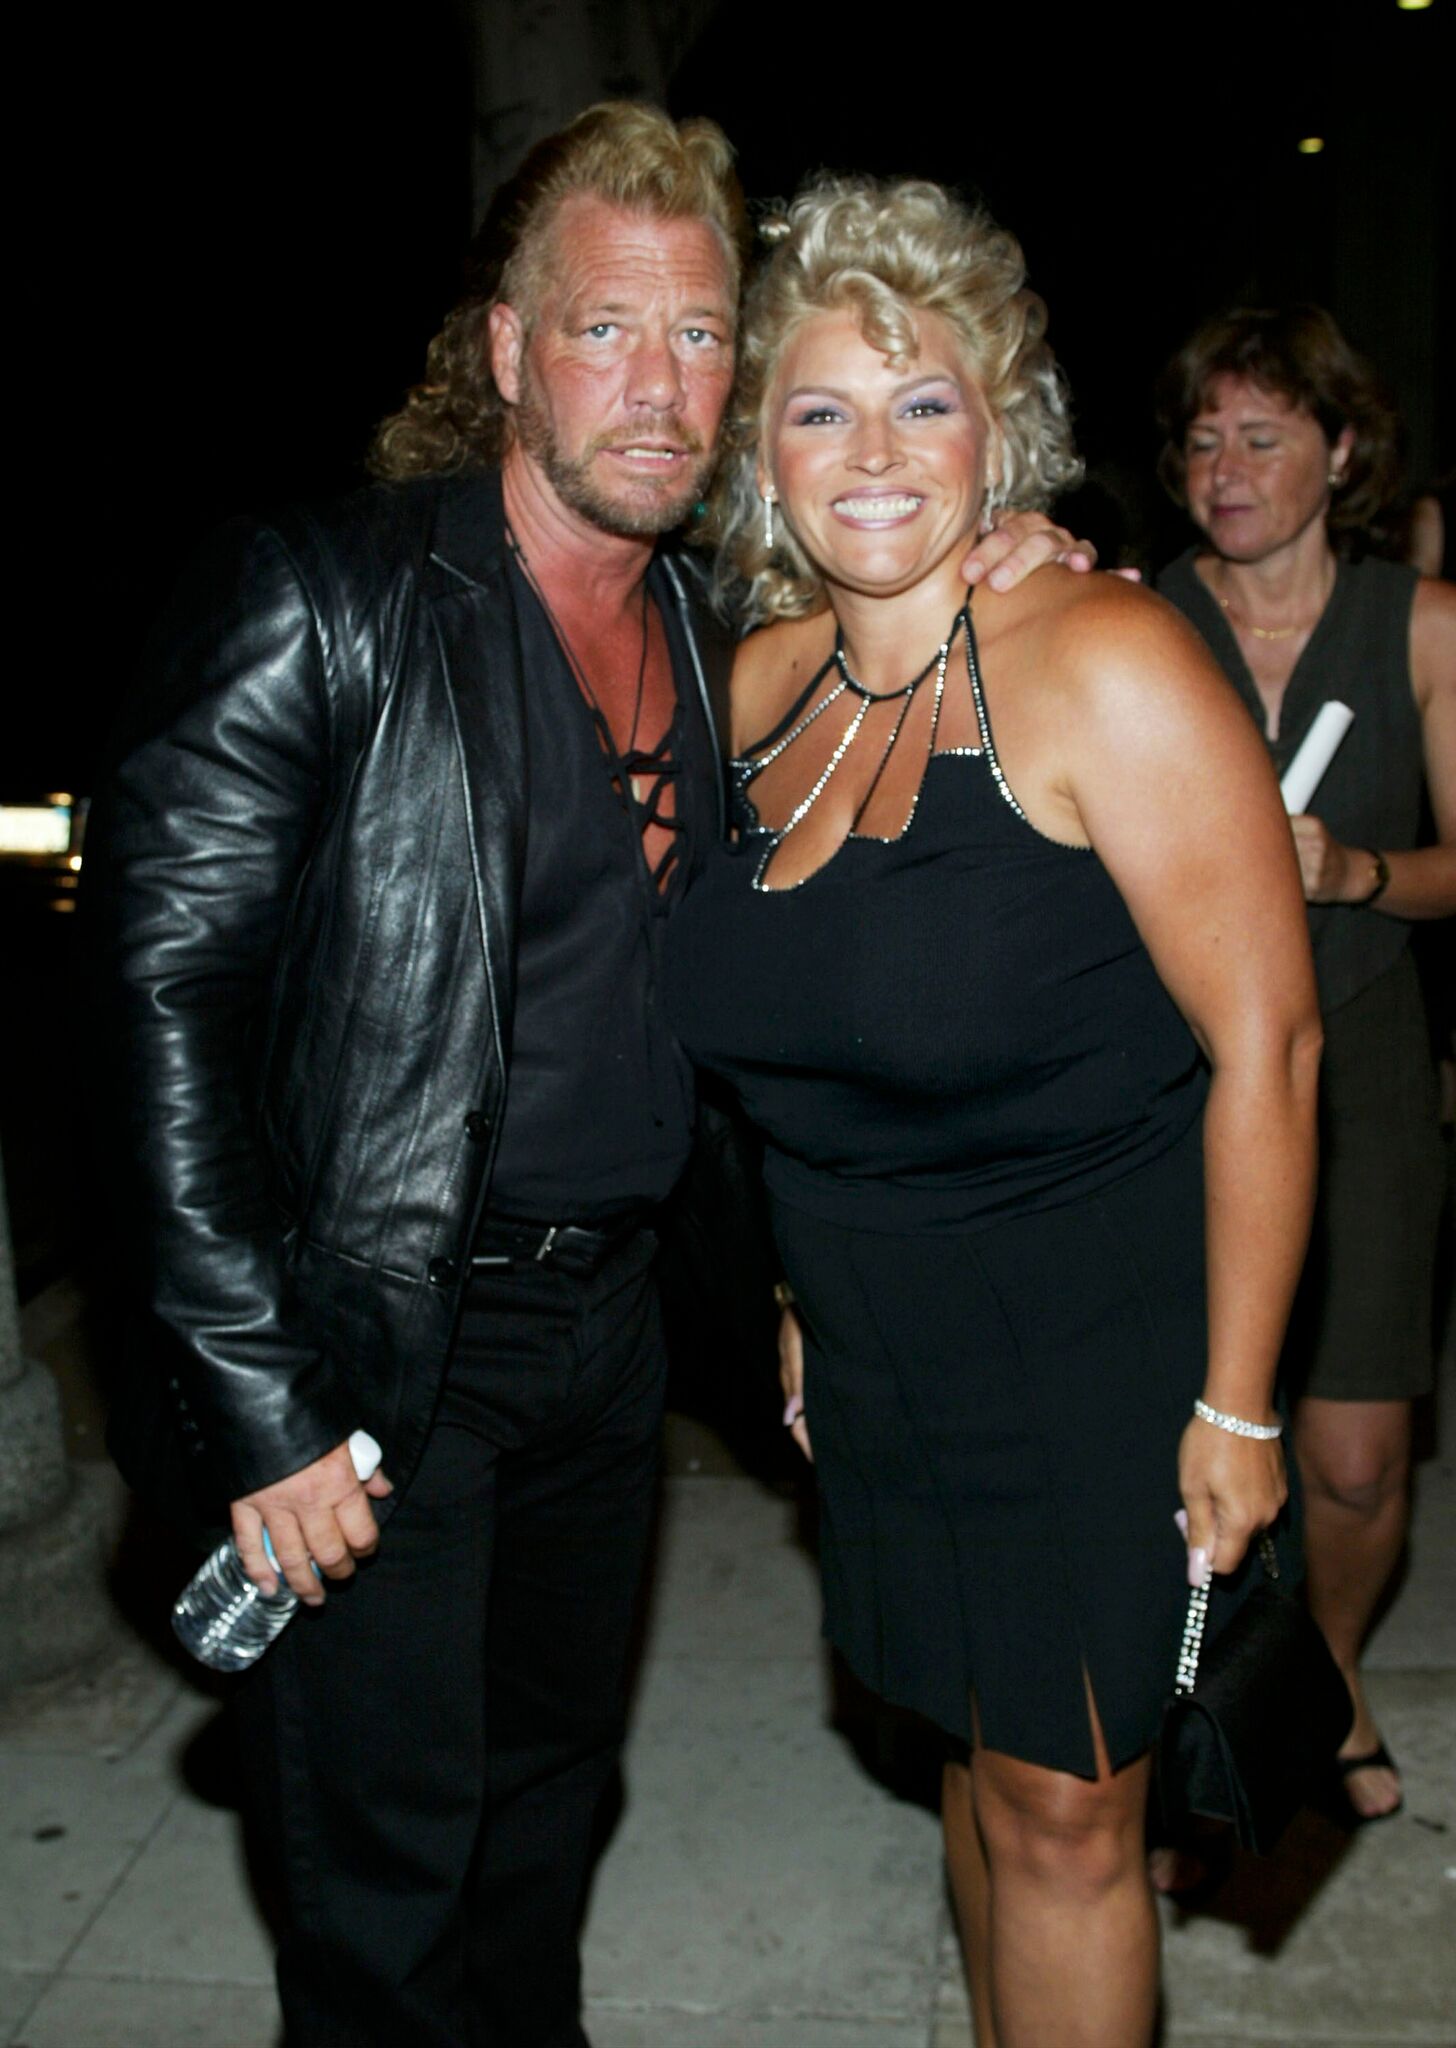  Duane "Dog" Chapman and his wife Beth Smith attend the film premiere | Getty Images